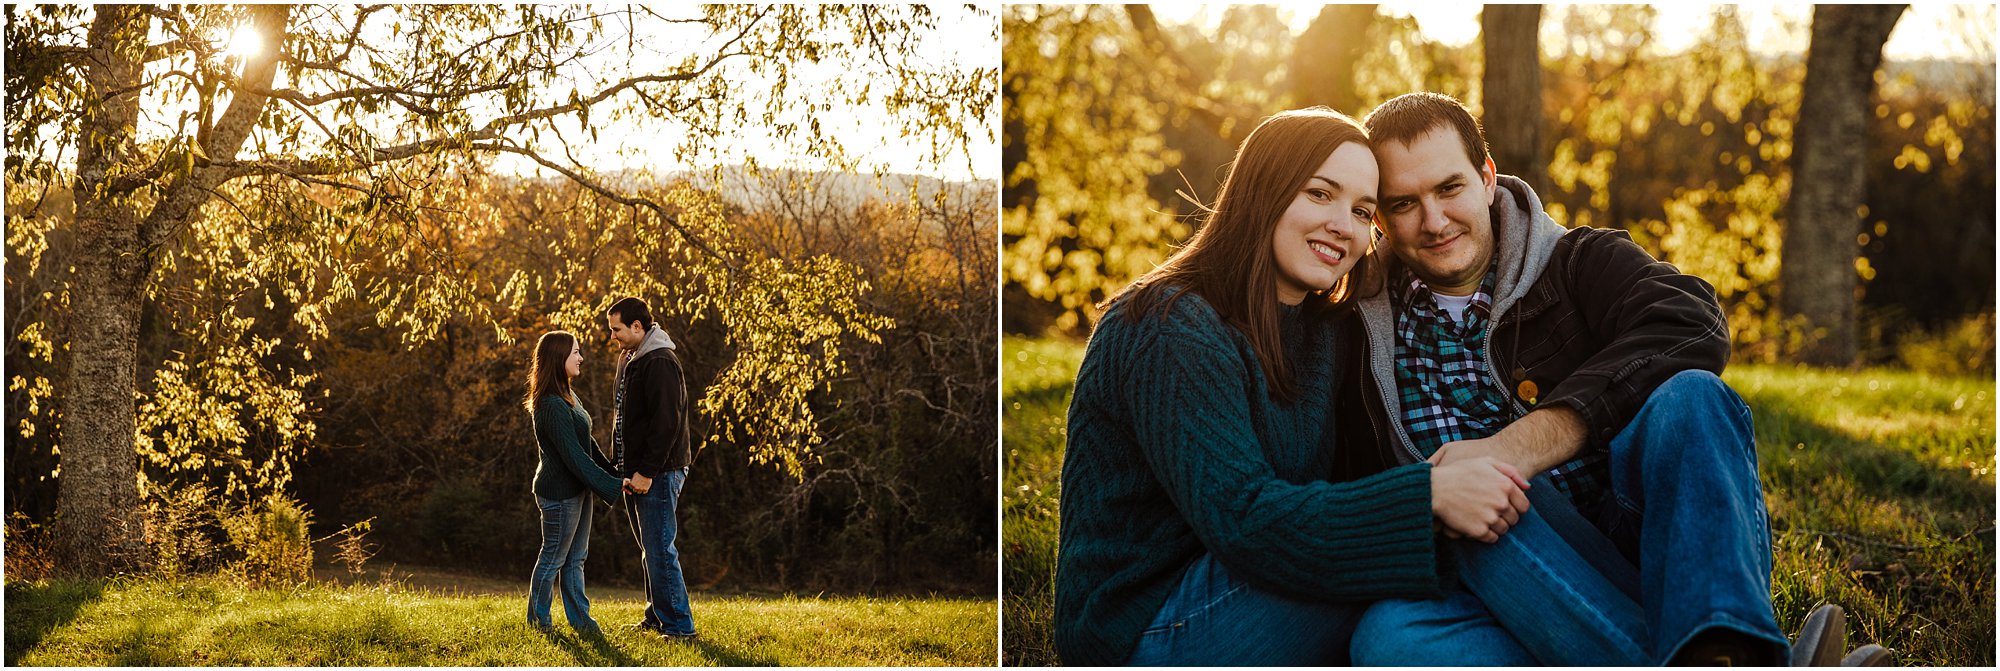 Engaged couple sitting in grass together embracing and smiling during their engagement session.